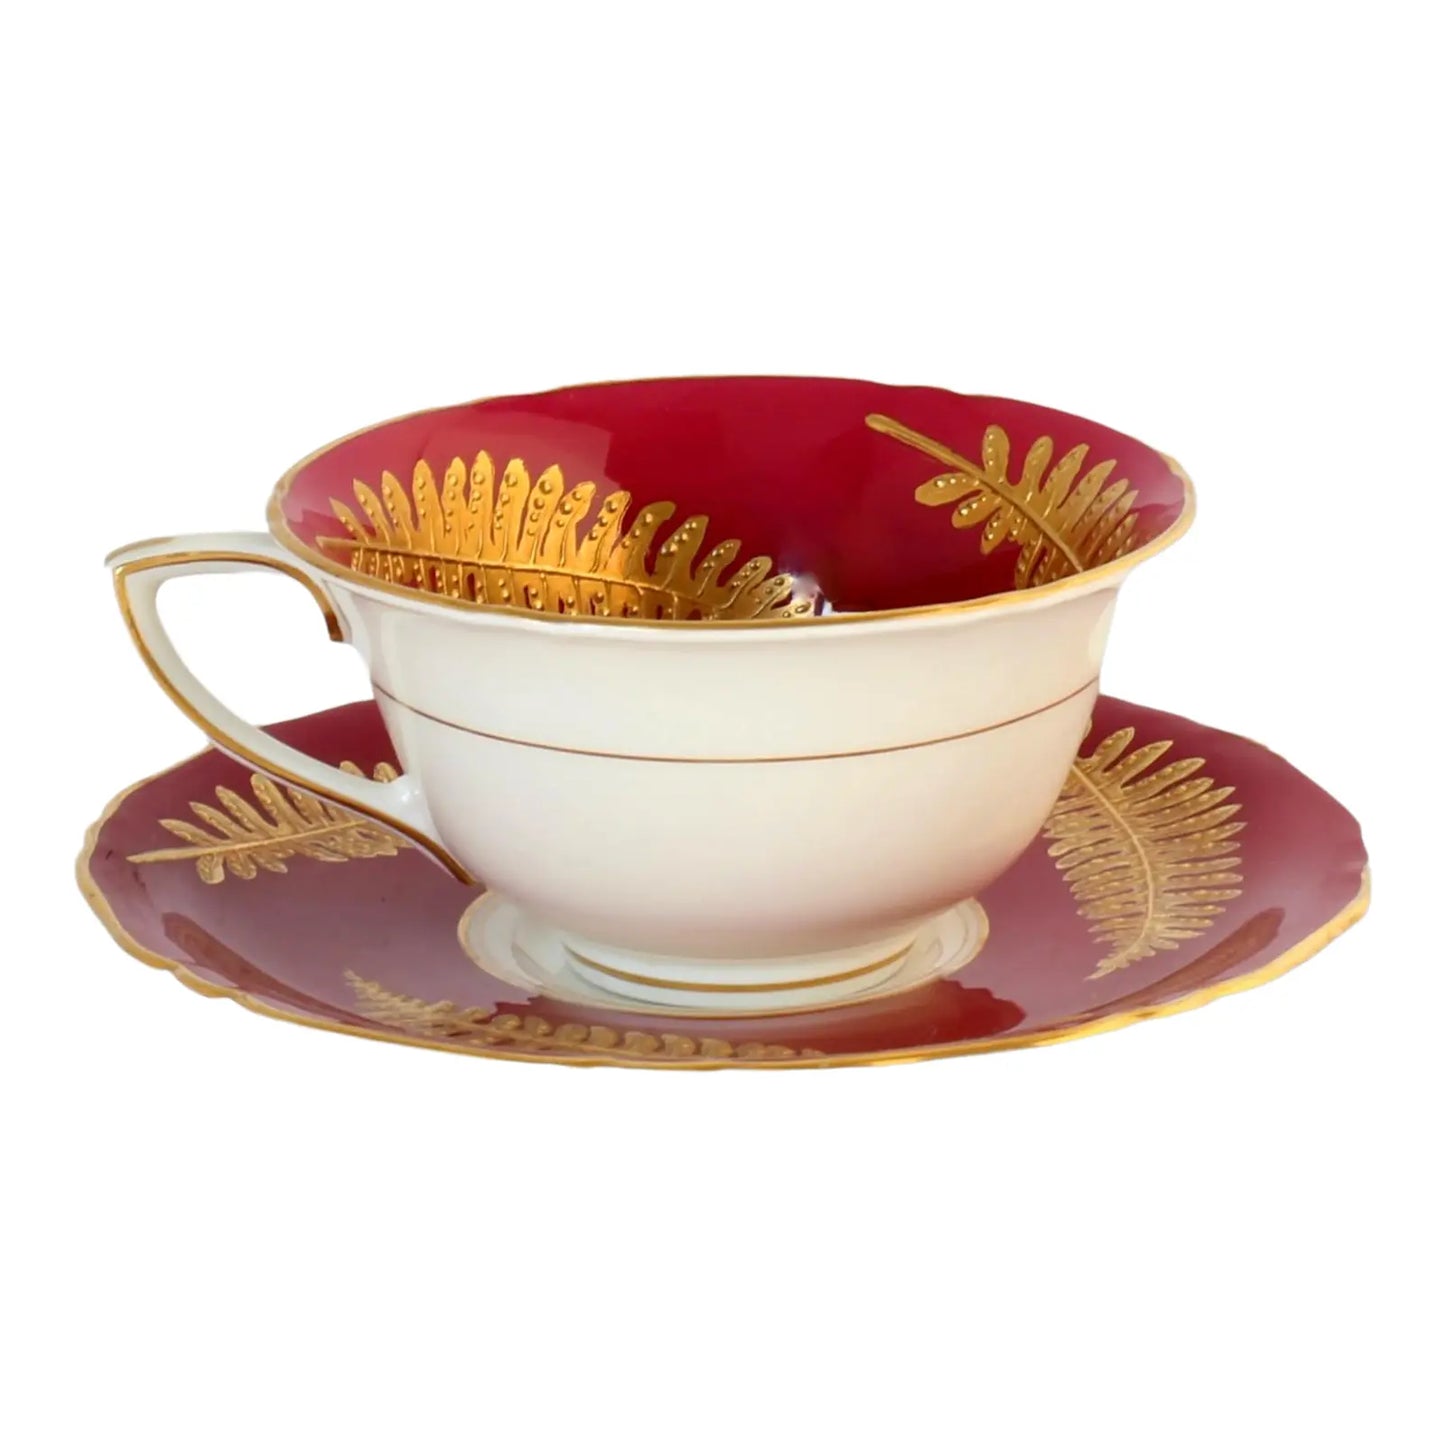 1920s Worcester 22k Gold Fern Tea Cup and Saucer